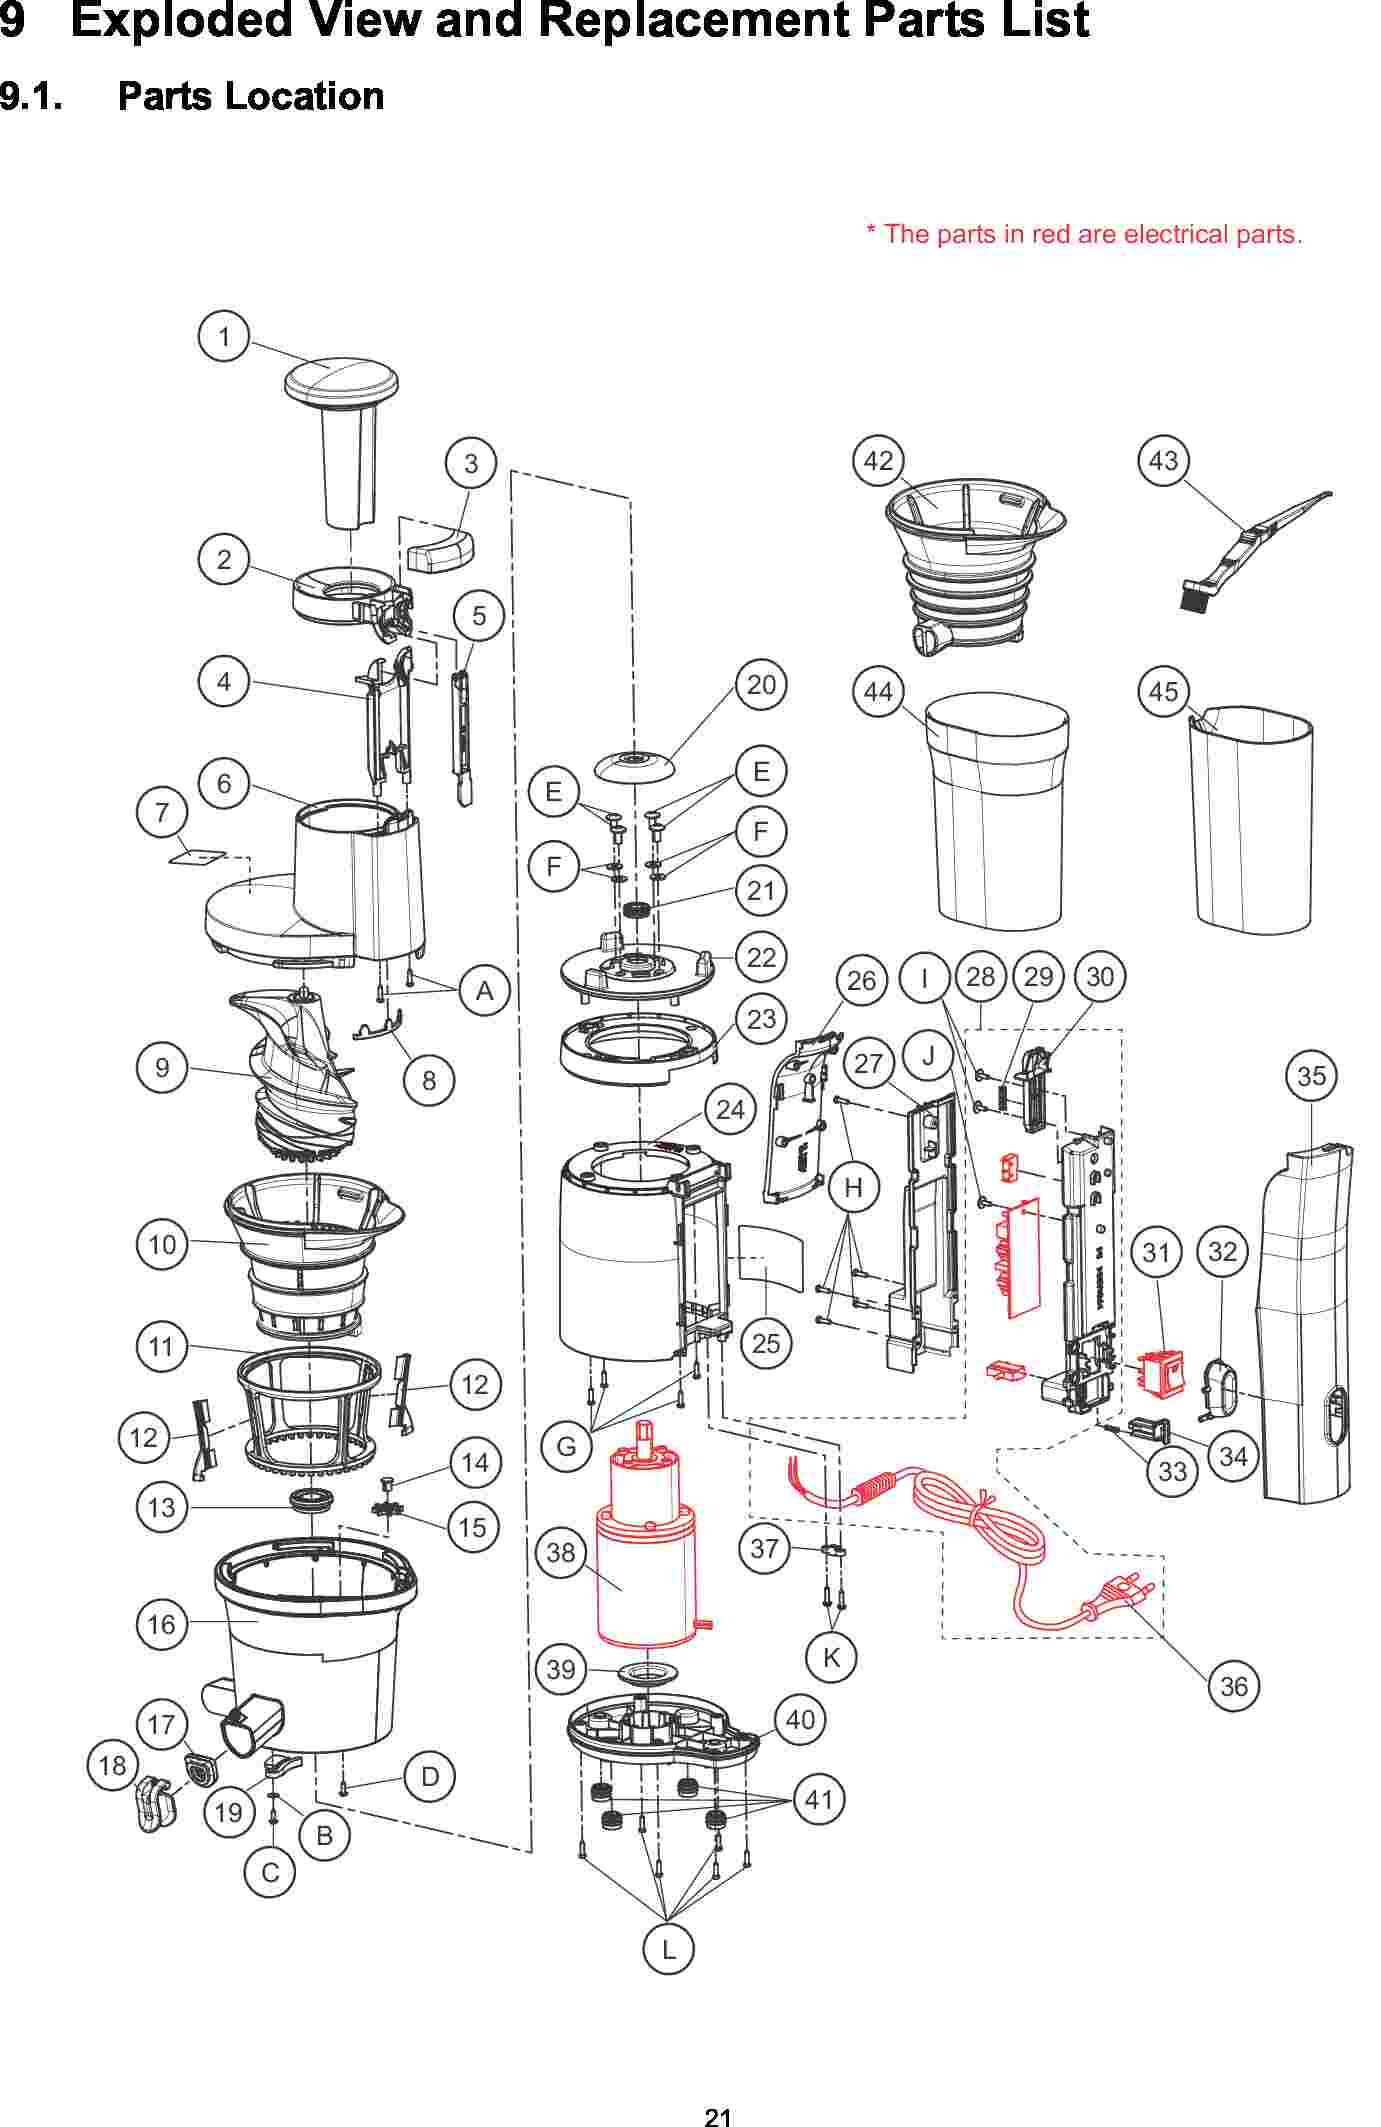 MJ-L700: Exploded View